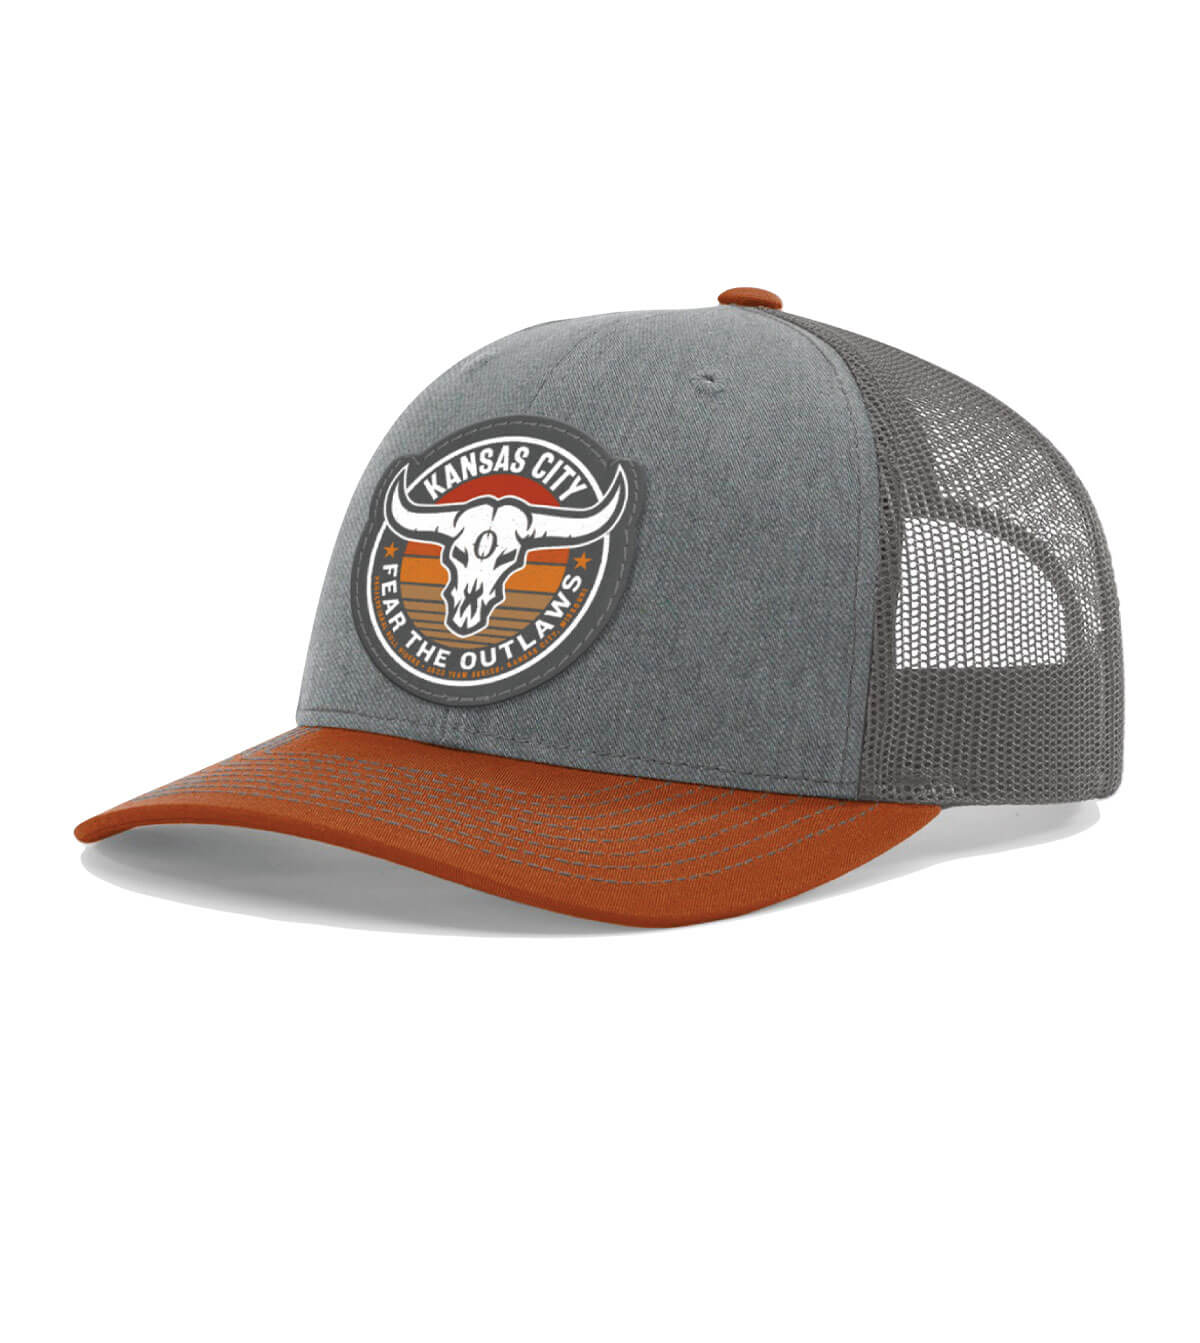 Front view of the "Fear the Outlaws" Adjustable Snapback Trucker Cap